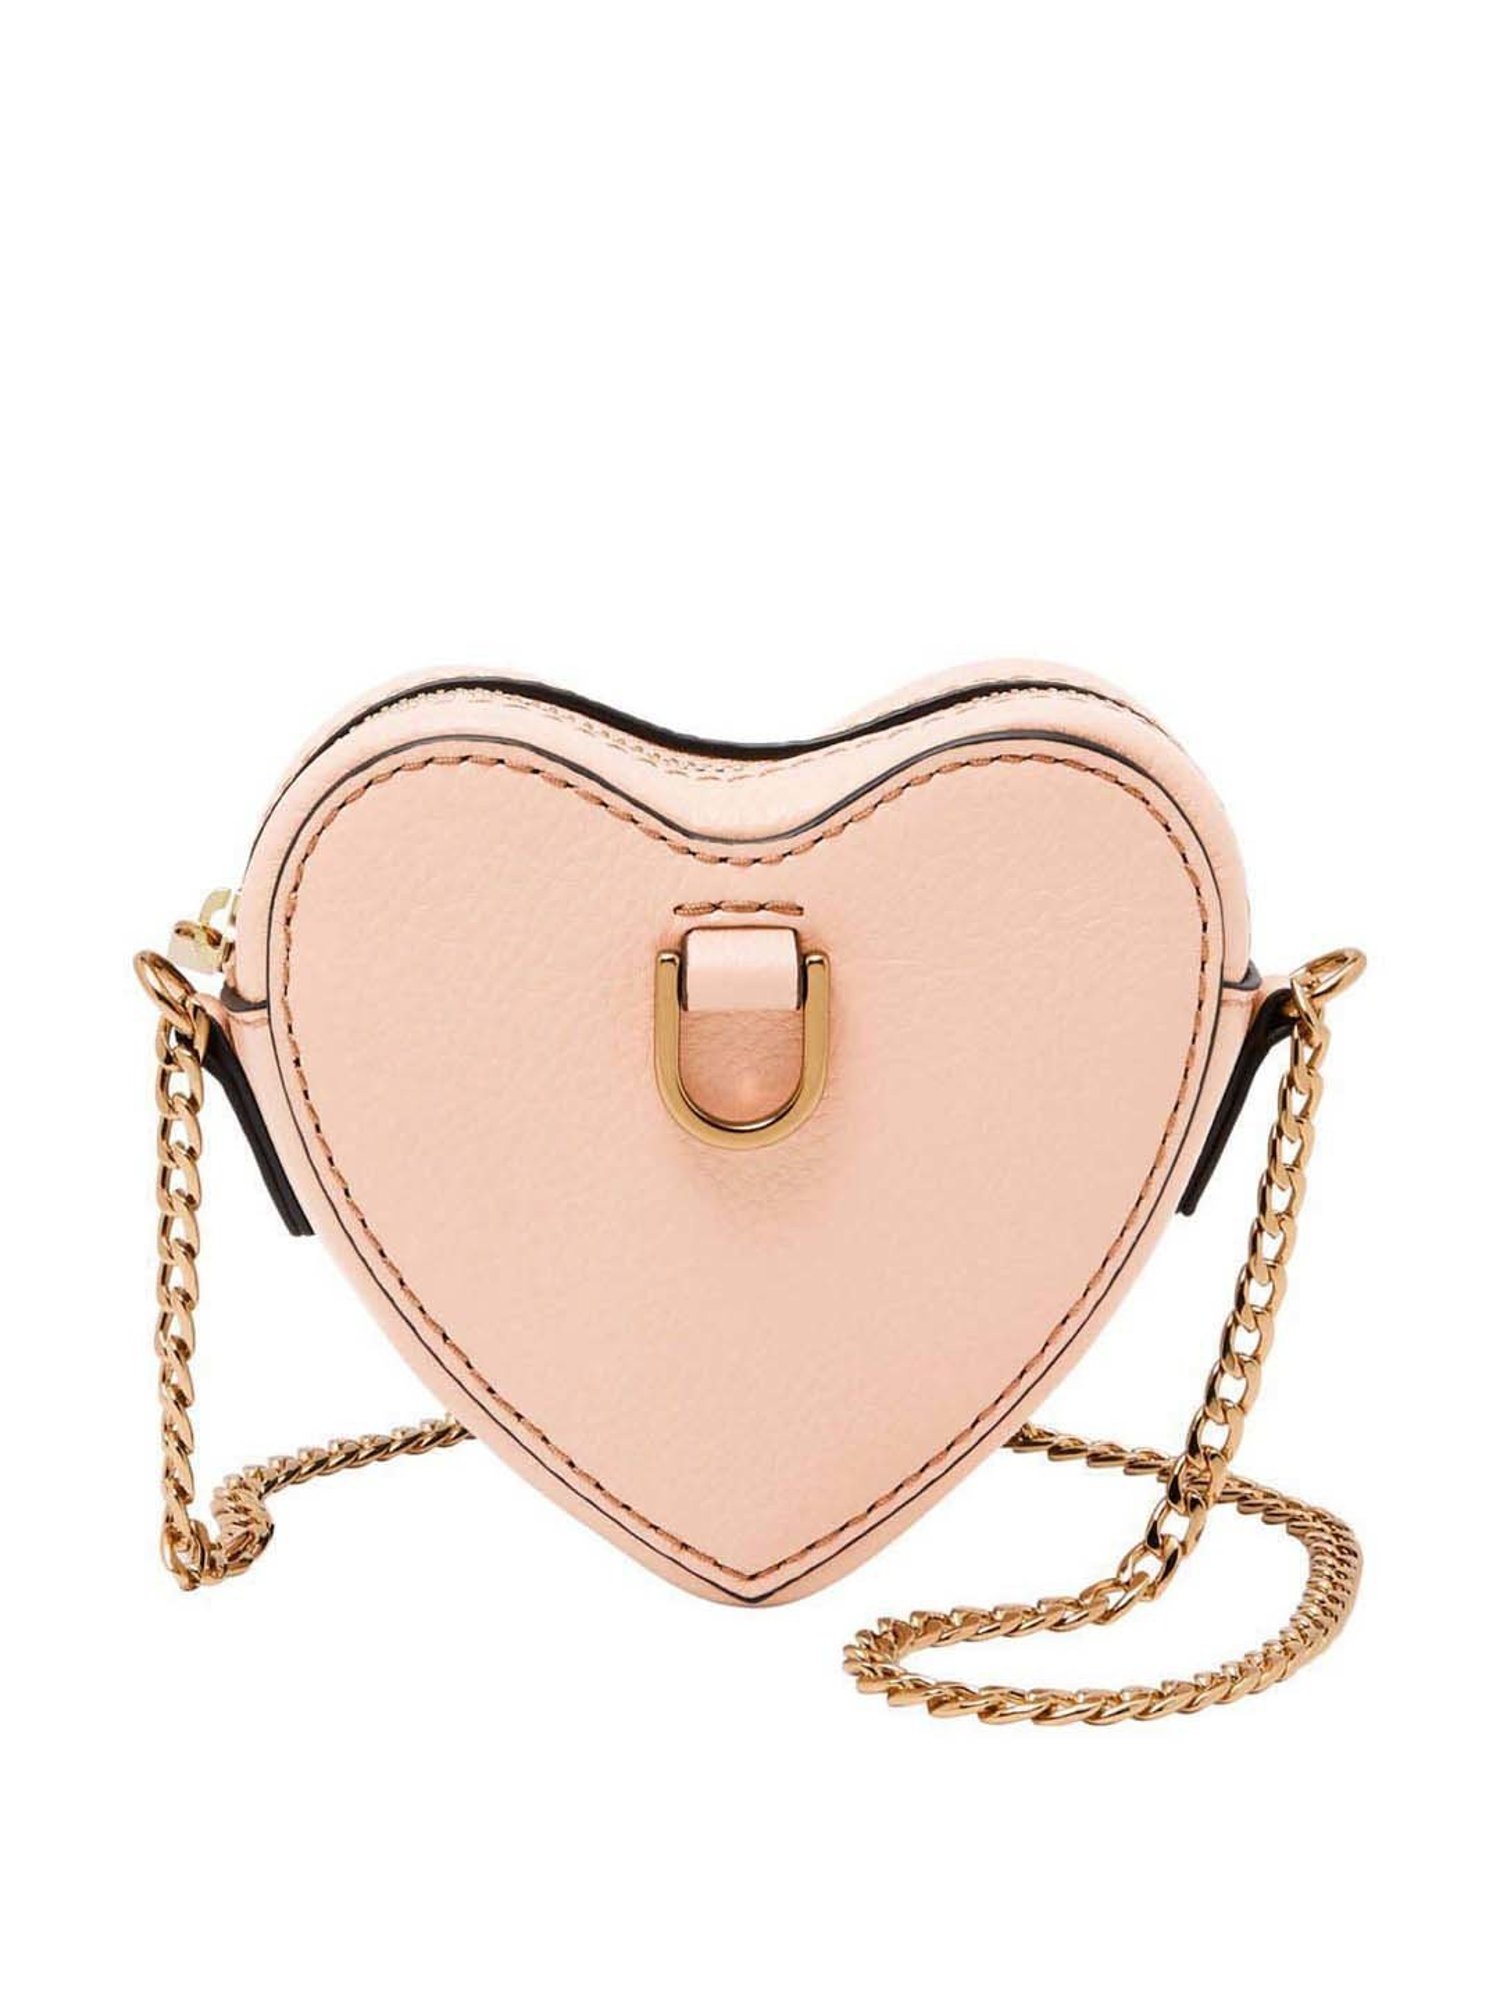 Pretty in light pink purse or The PPP! – Everything Sass